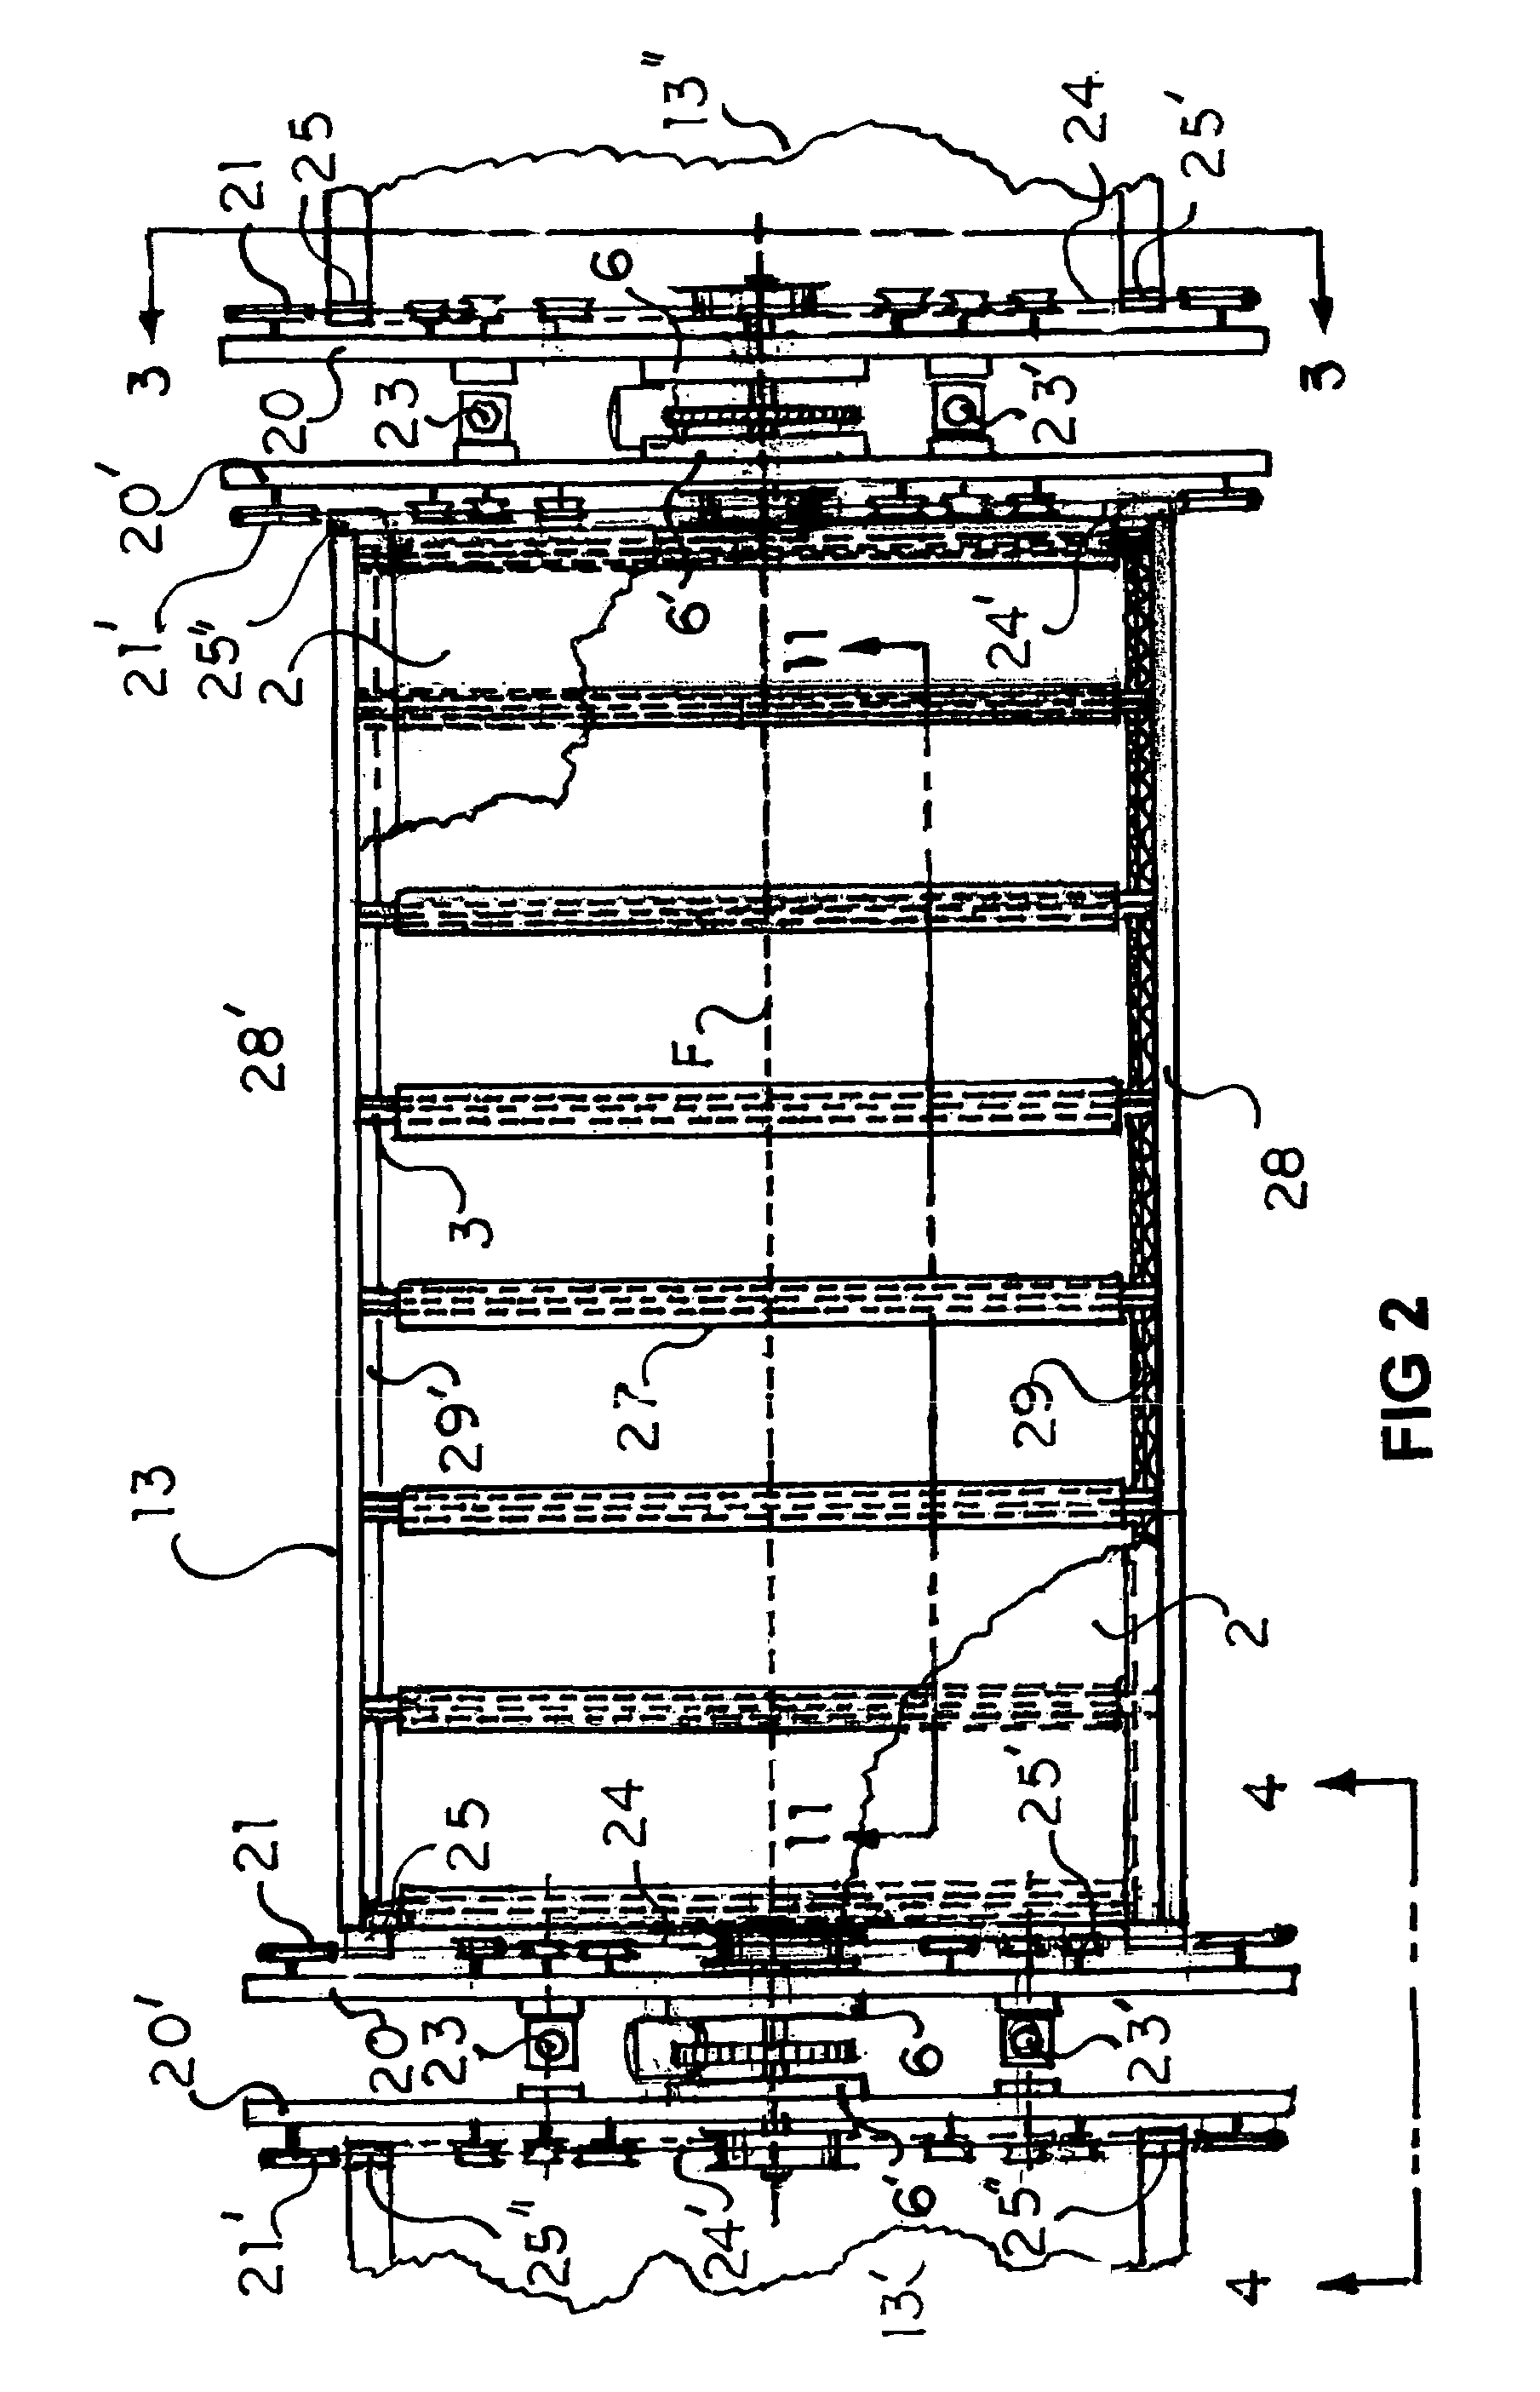 Parabolic trough solar collector for fluid heating and photovoltaic cells